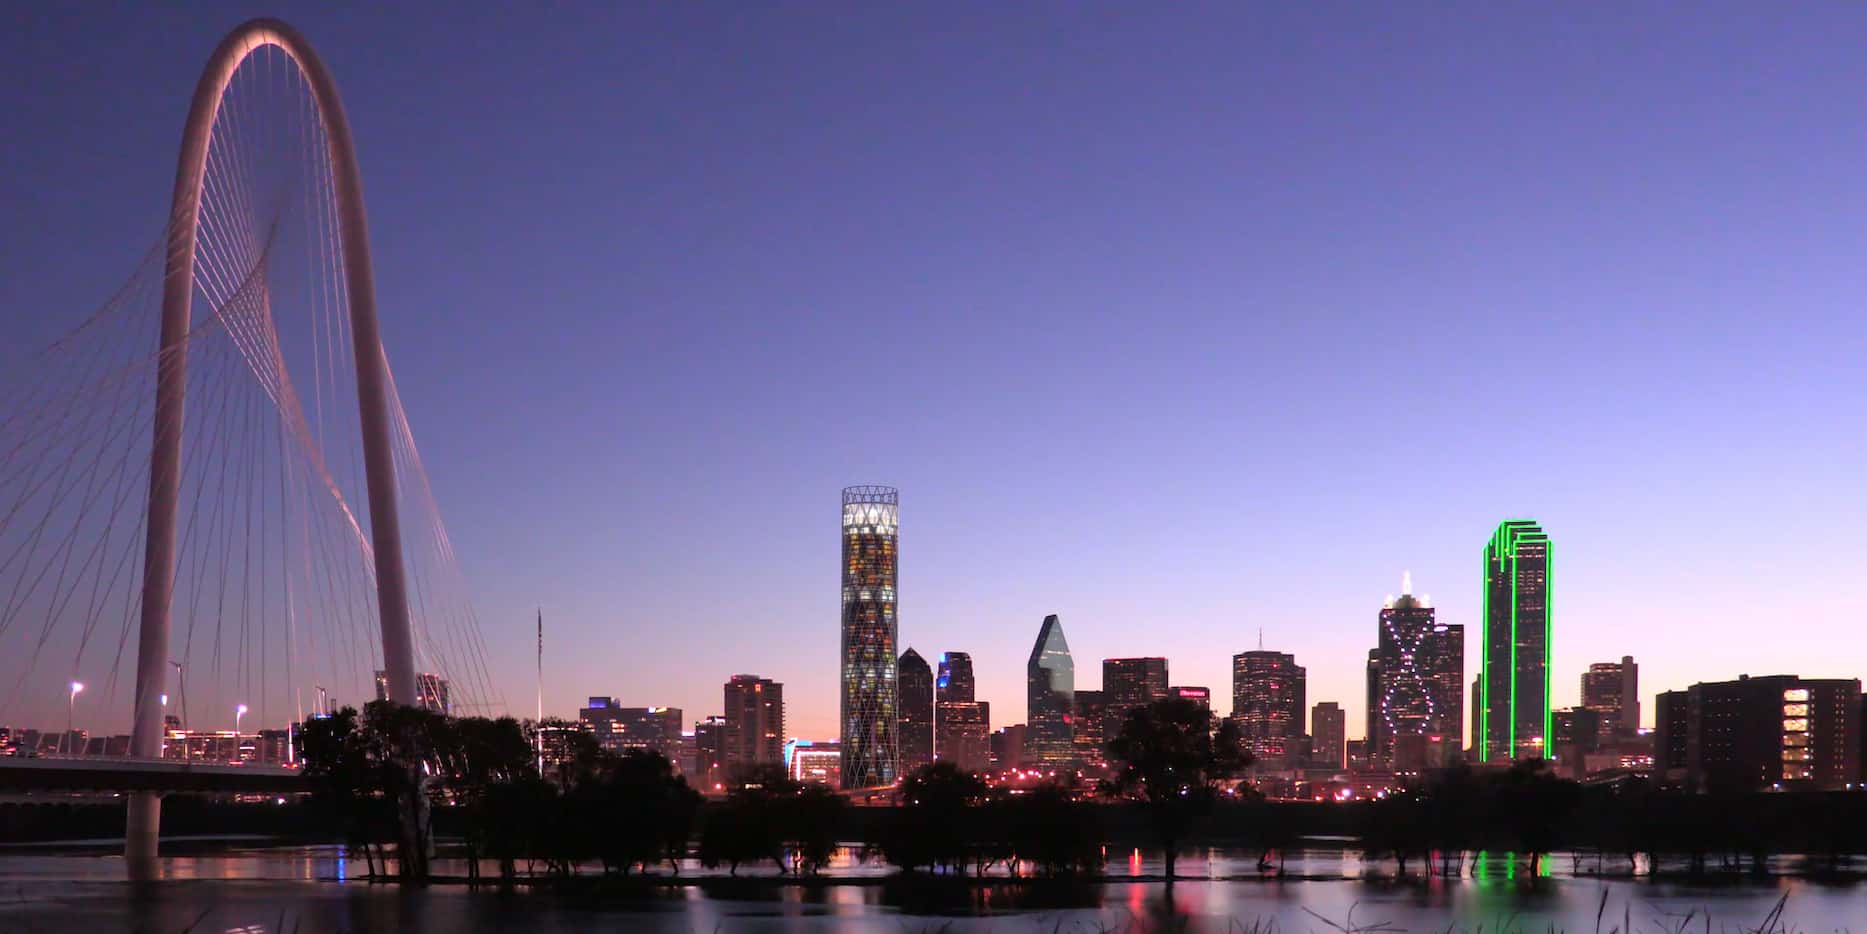 An architect's rendering shows the proposed tower on the Dallas skyline.